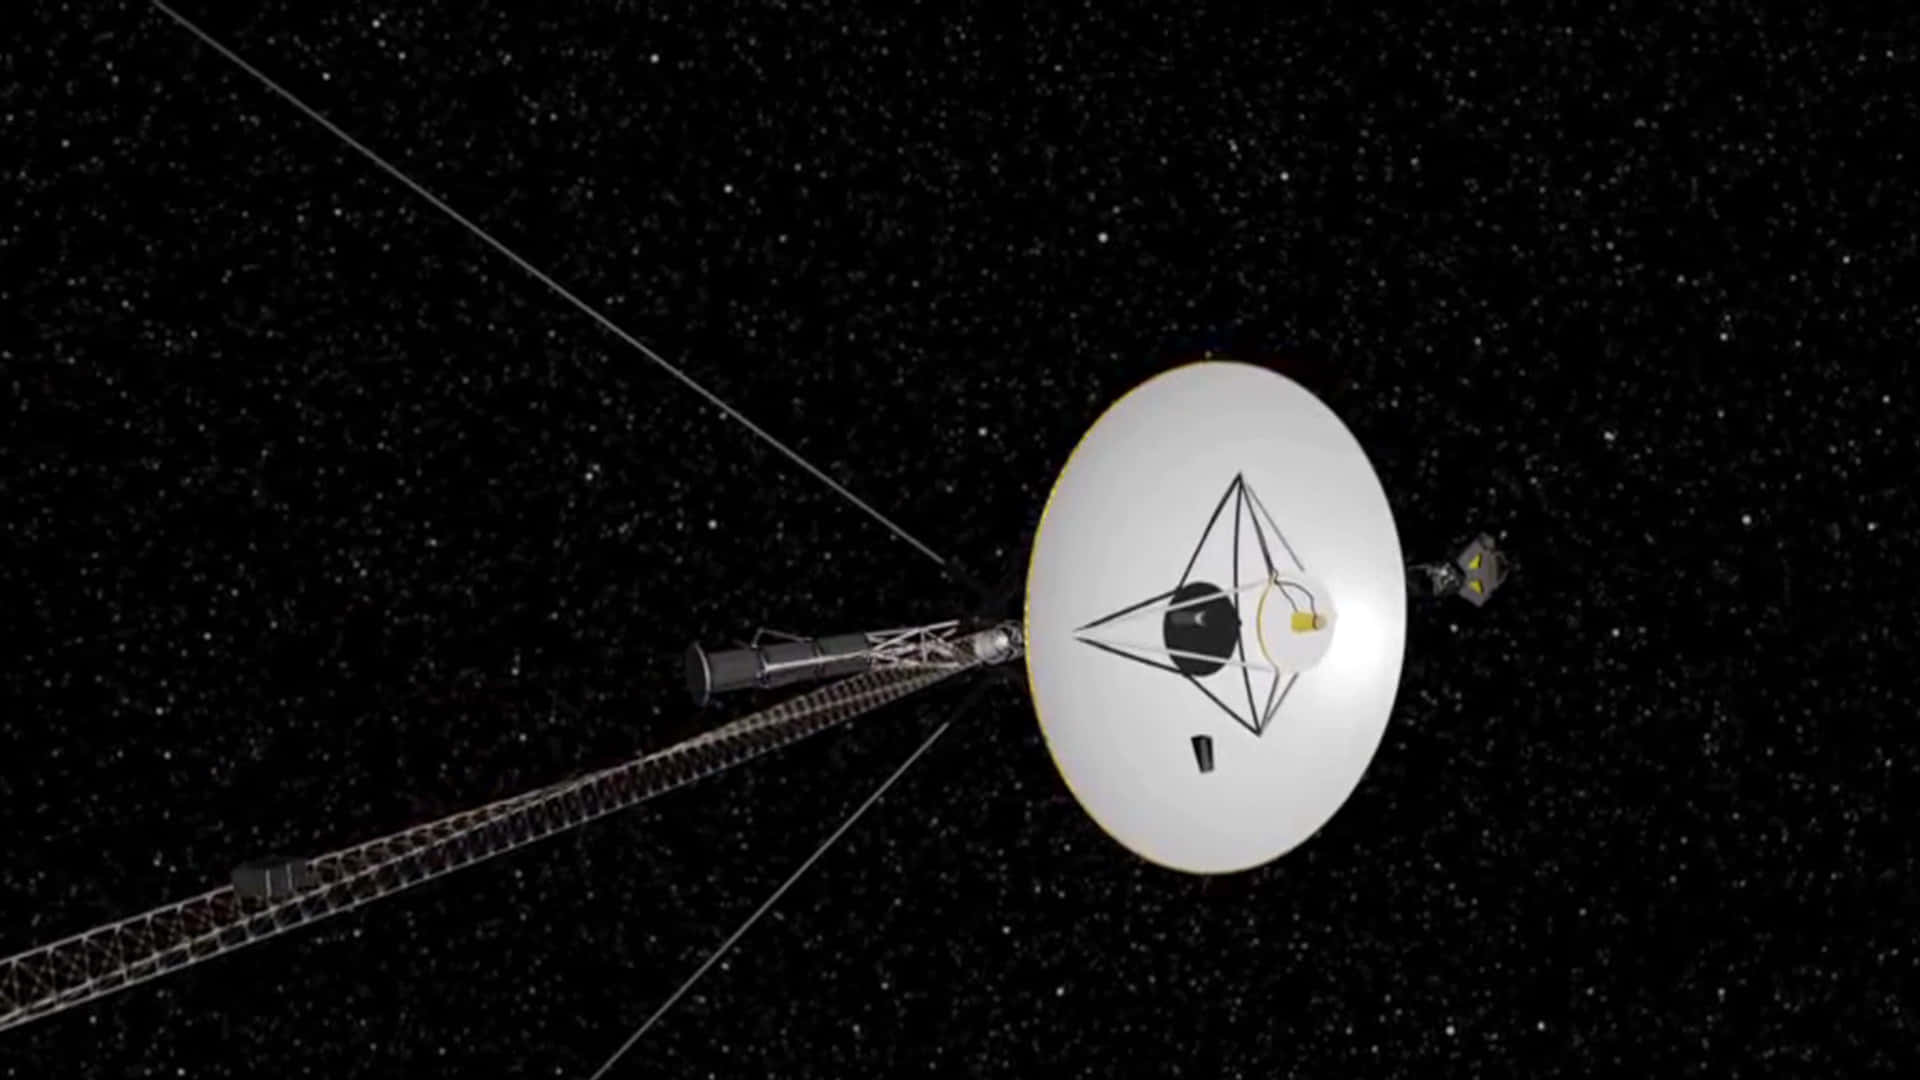 NASA's legendary Voyager space mission